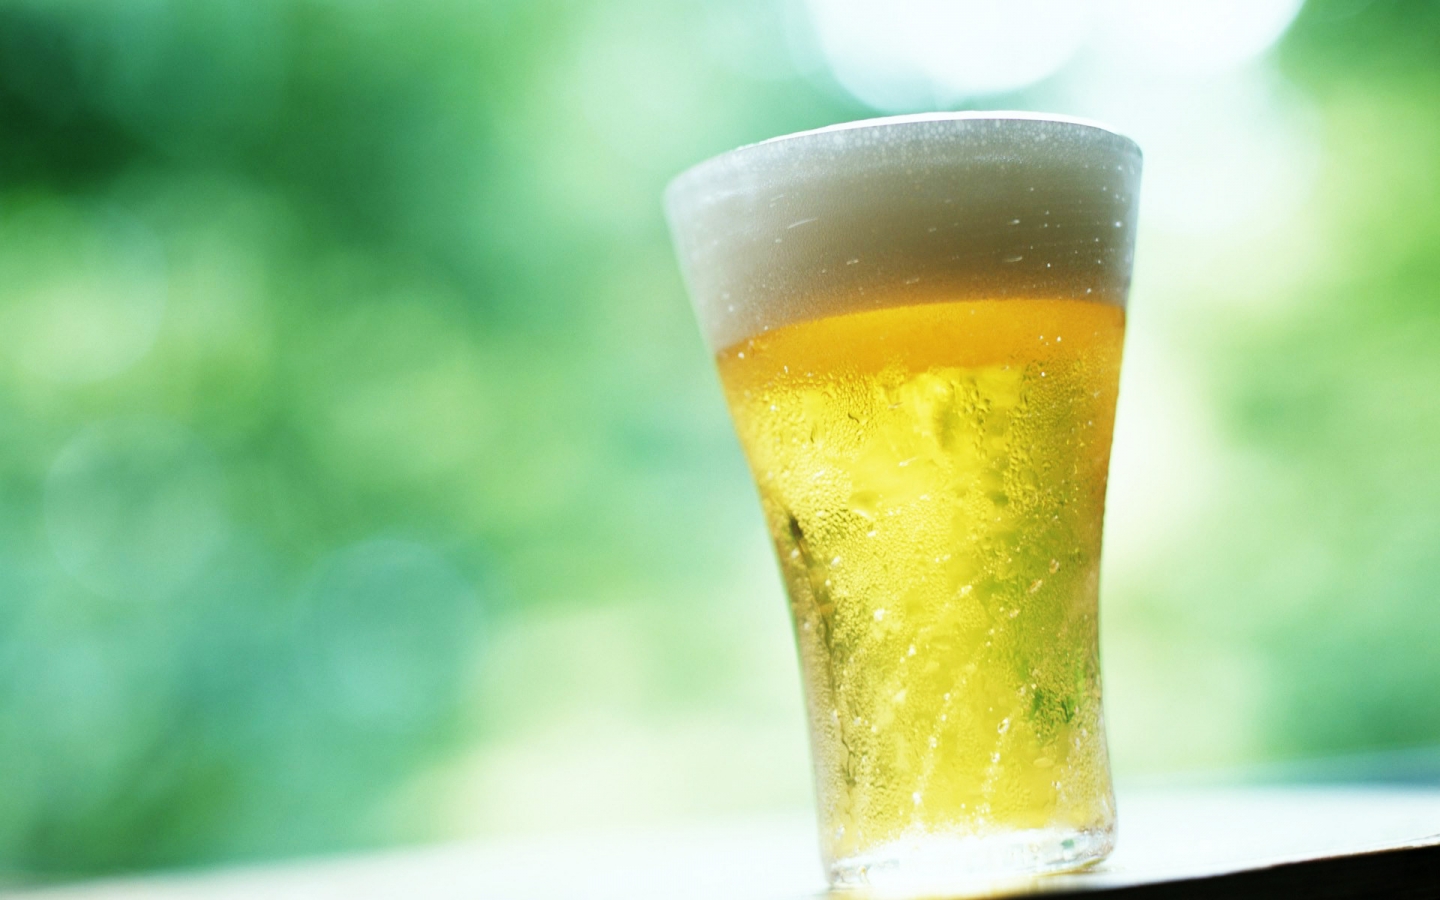 Cold Glass of Beer hd wallpaper for 1440 x 900 widescreen resolution